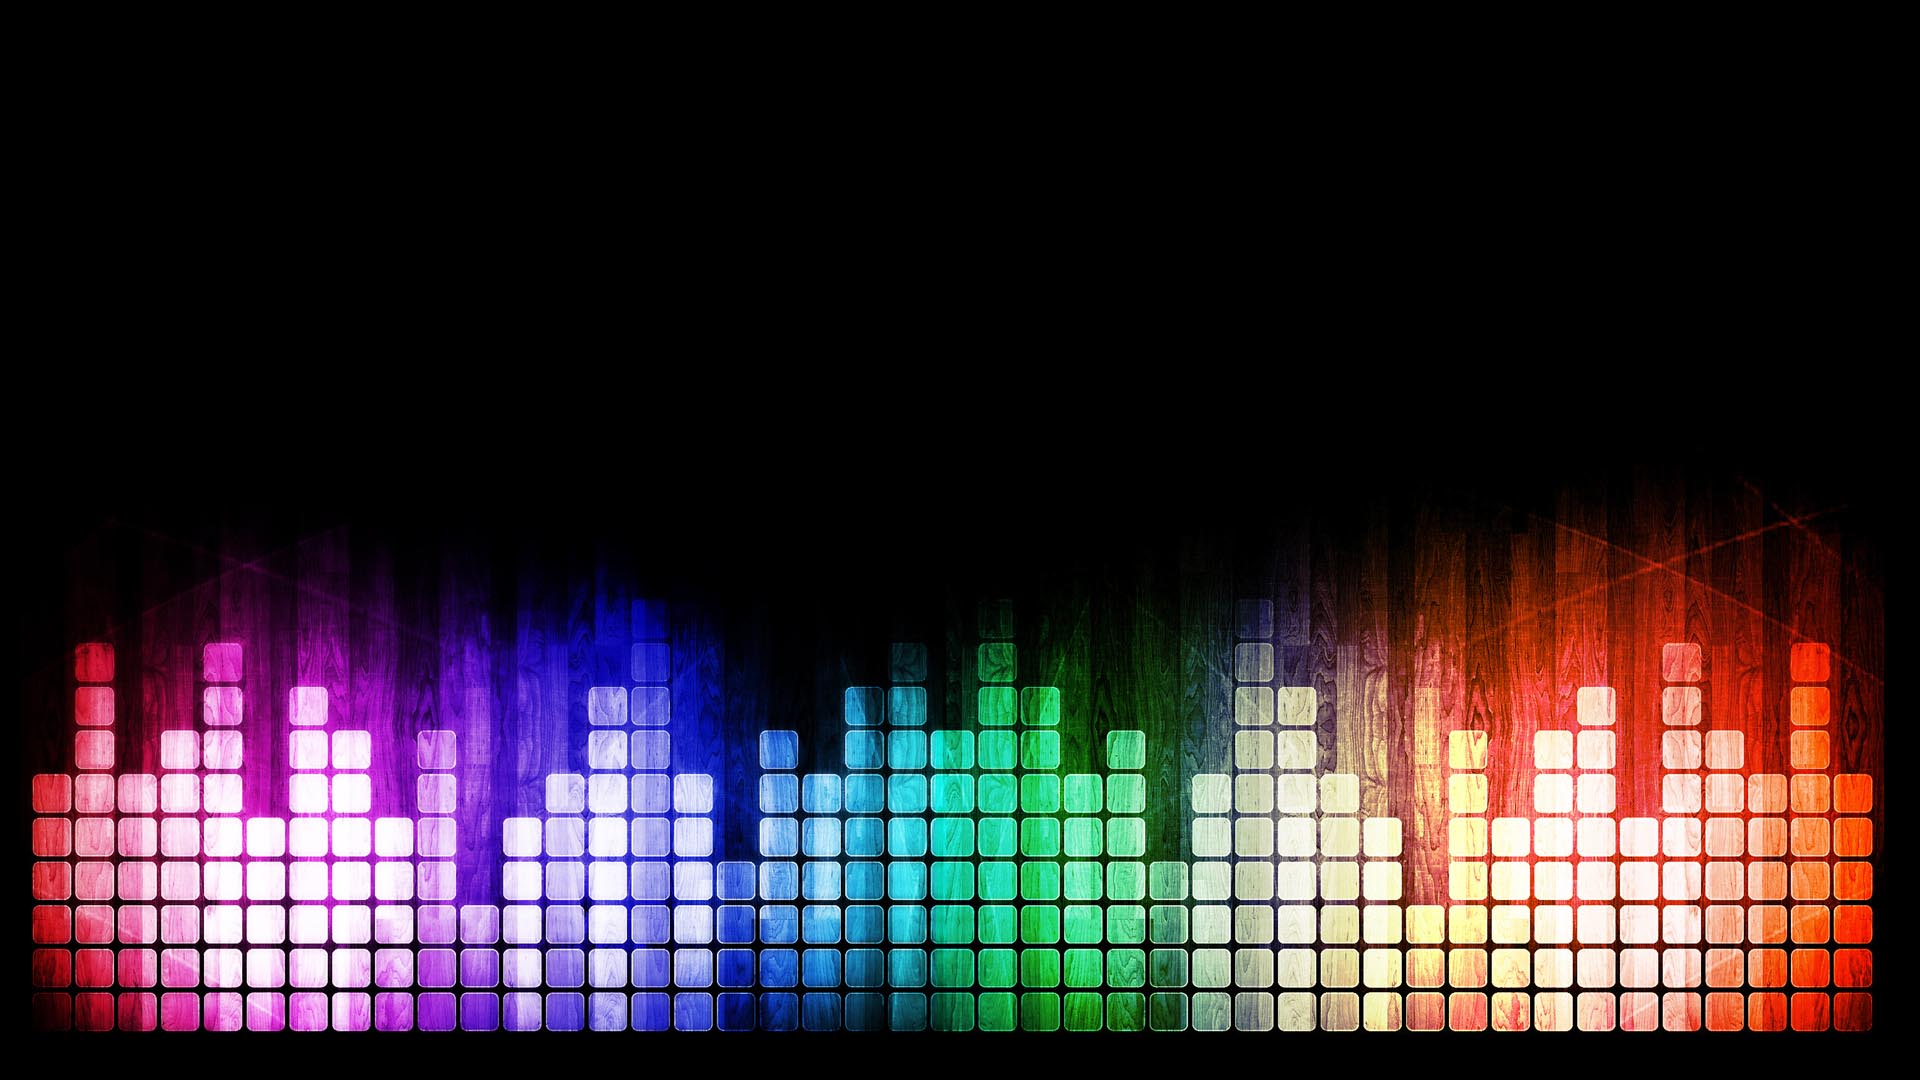 hd wallpapers 1920x1080 music